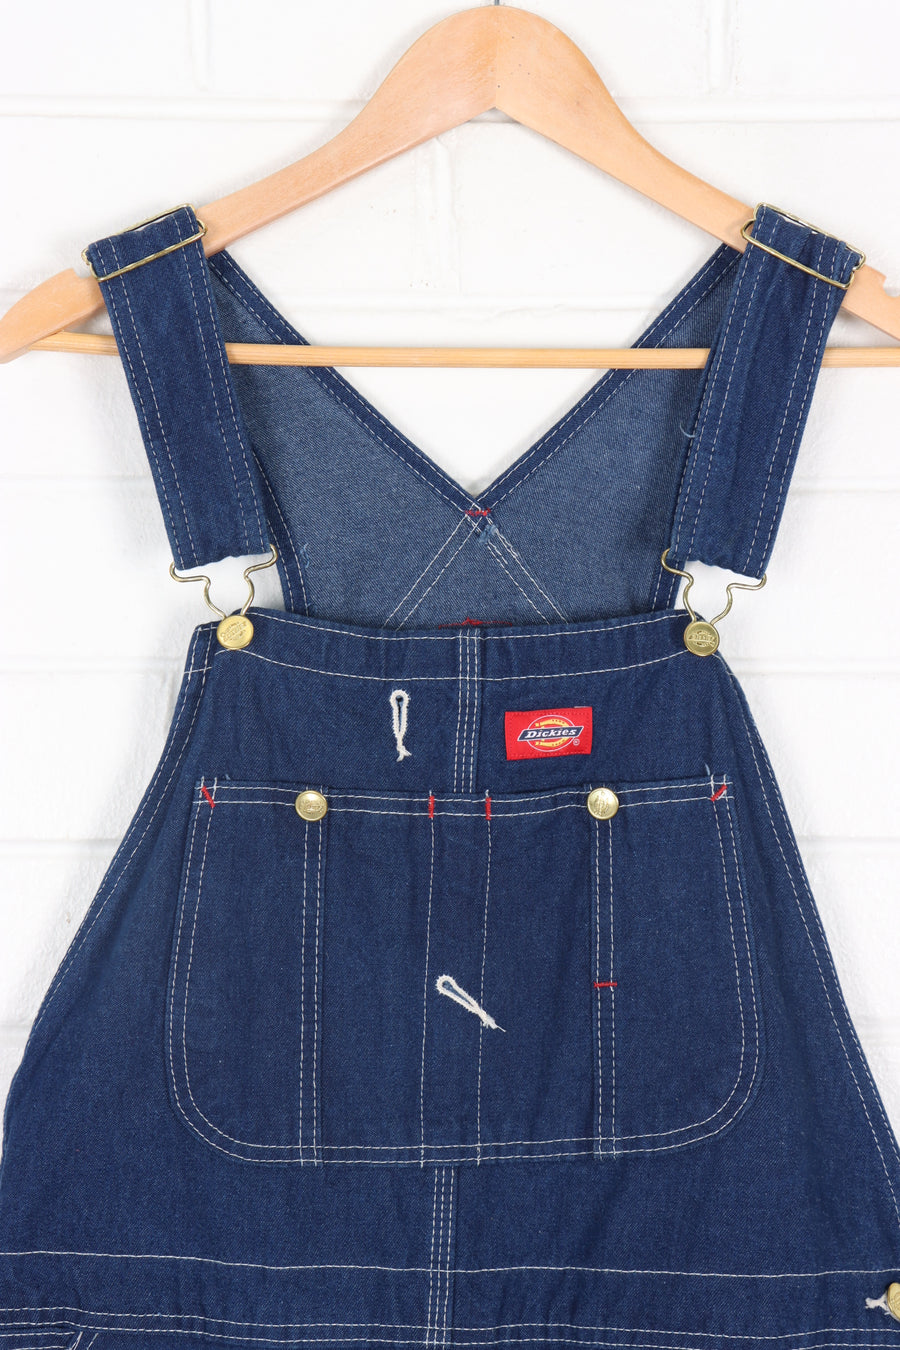 DICKIES Dark Wash Contrast Stitching Long Overalls (34x34)